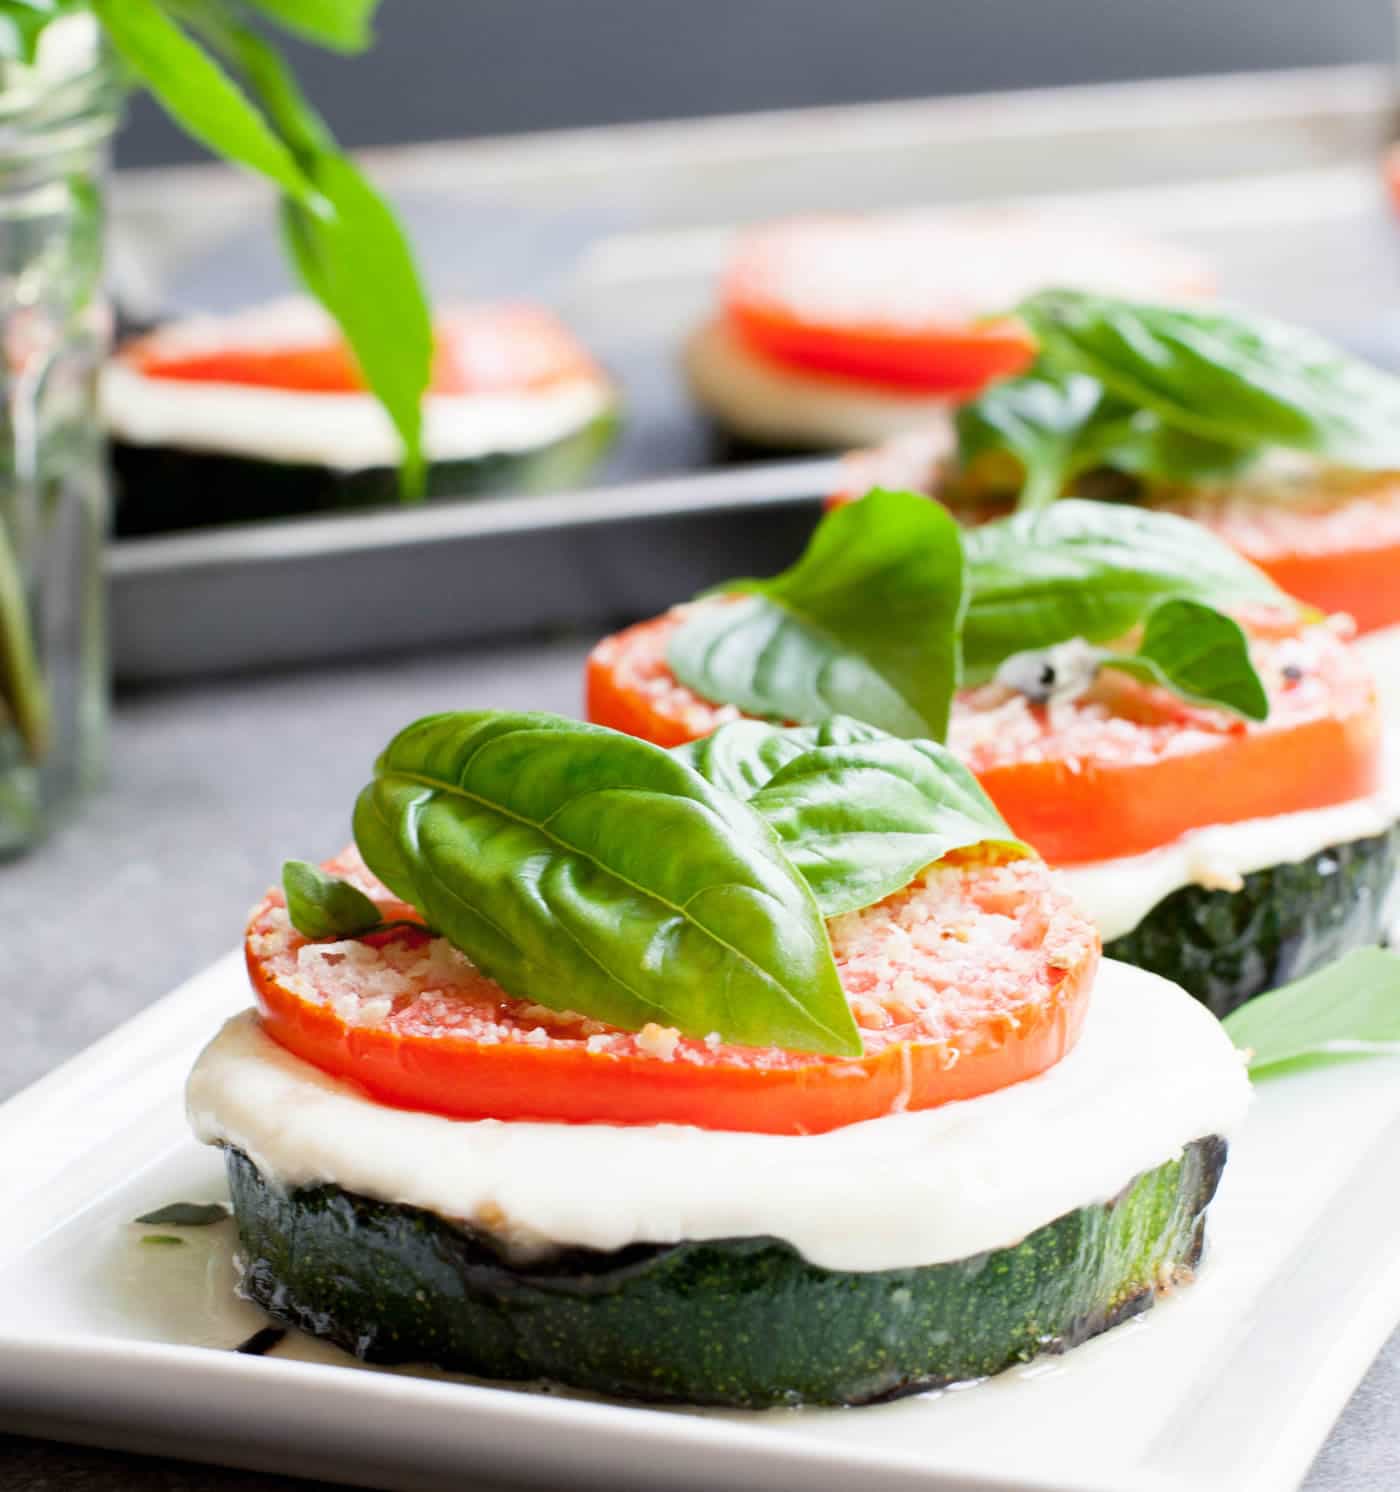 Grilled Zucchini Caprese Stacks. Thick, meaty slices of zucchini are grilled then stacked with hearty slices of tomato and fresh mozzarella. Filling enough for a main, delicious as a side or pop it onto a bun for a delicious veggie sandwich!